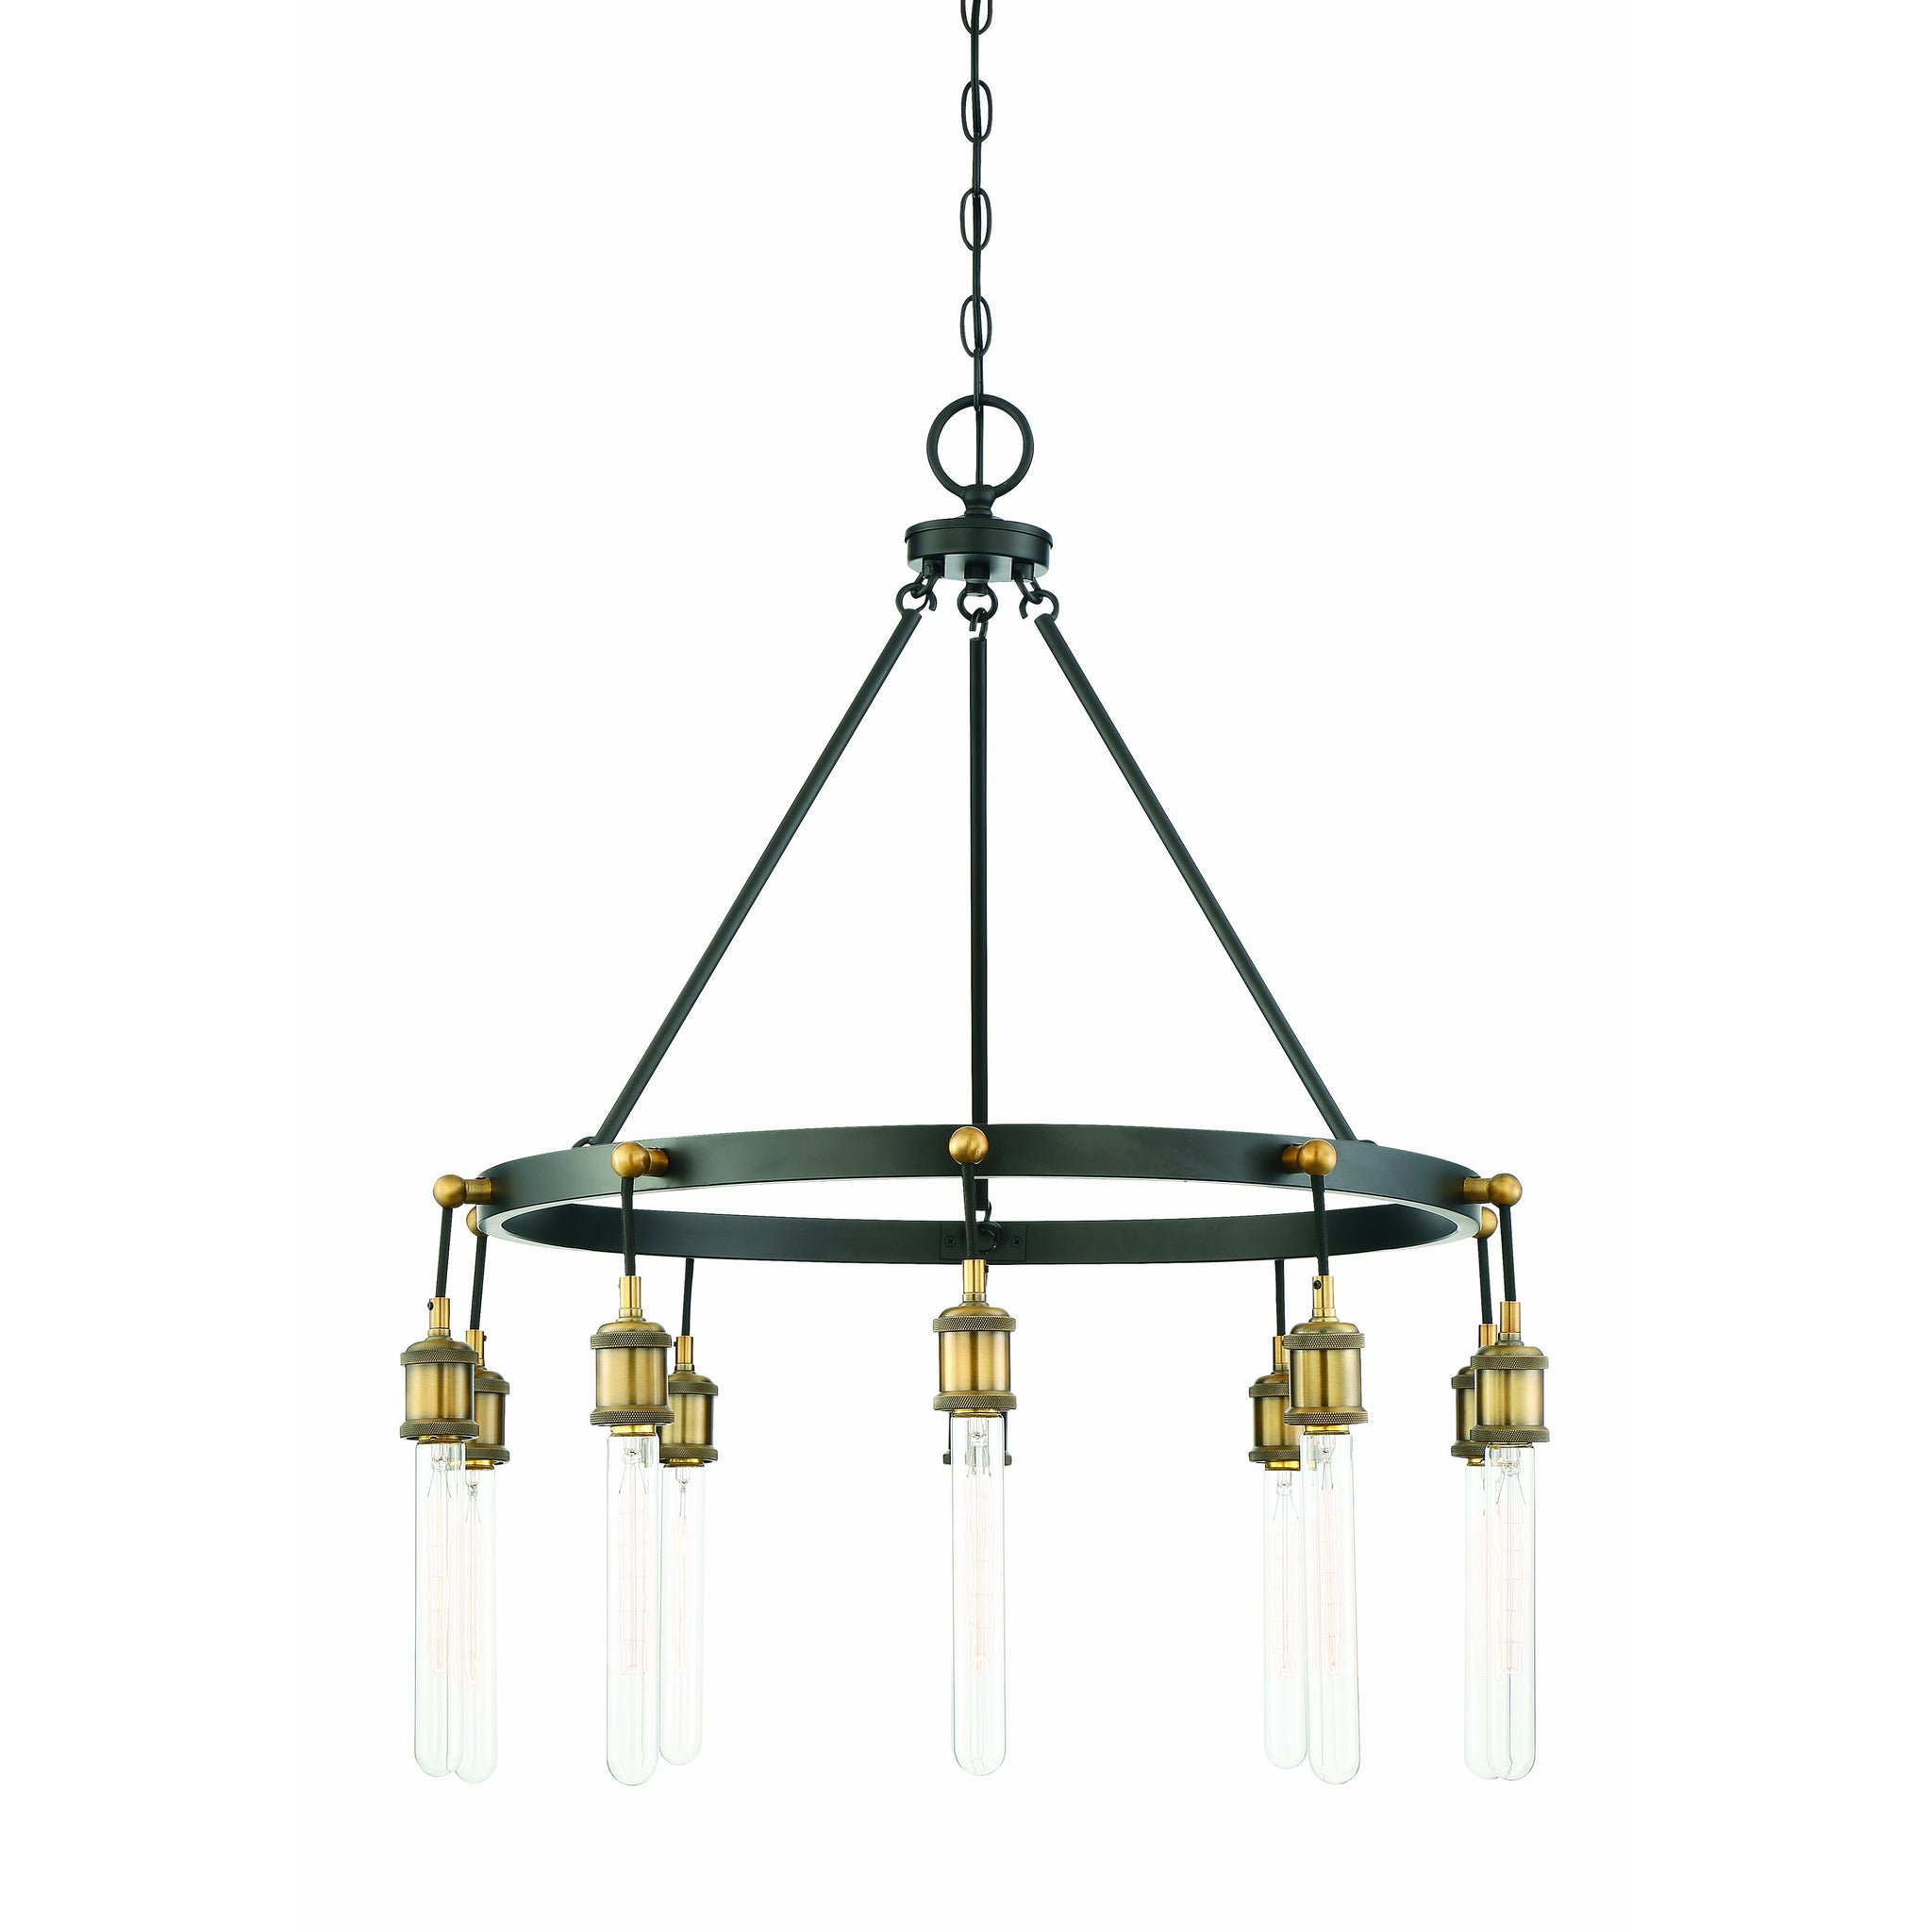 Campbell Chandelier Vintage Black with Warm Brass